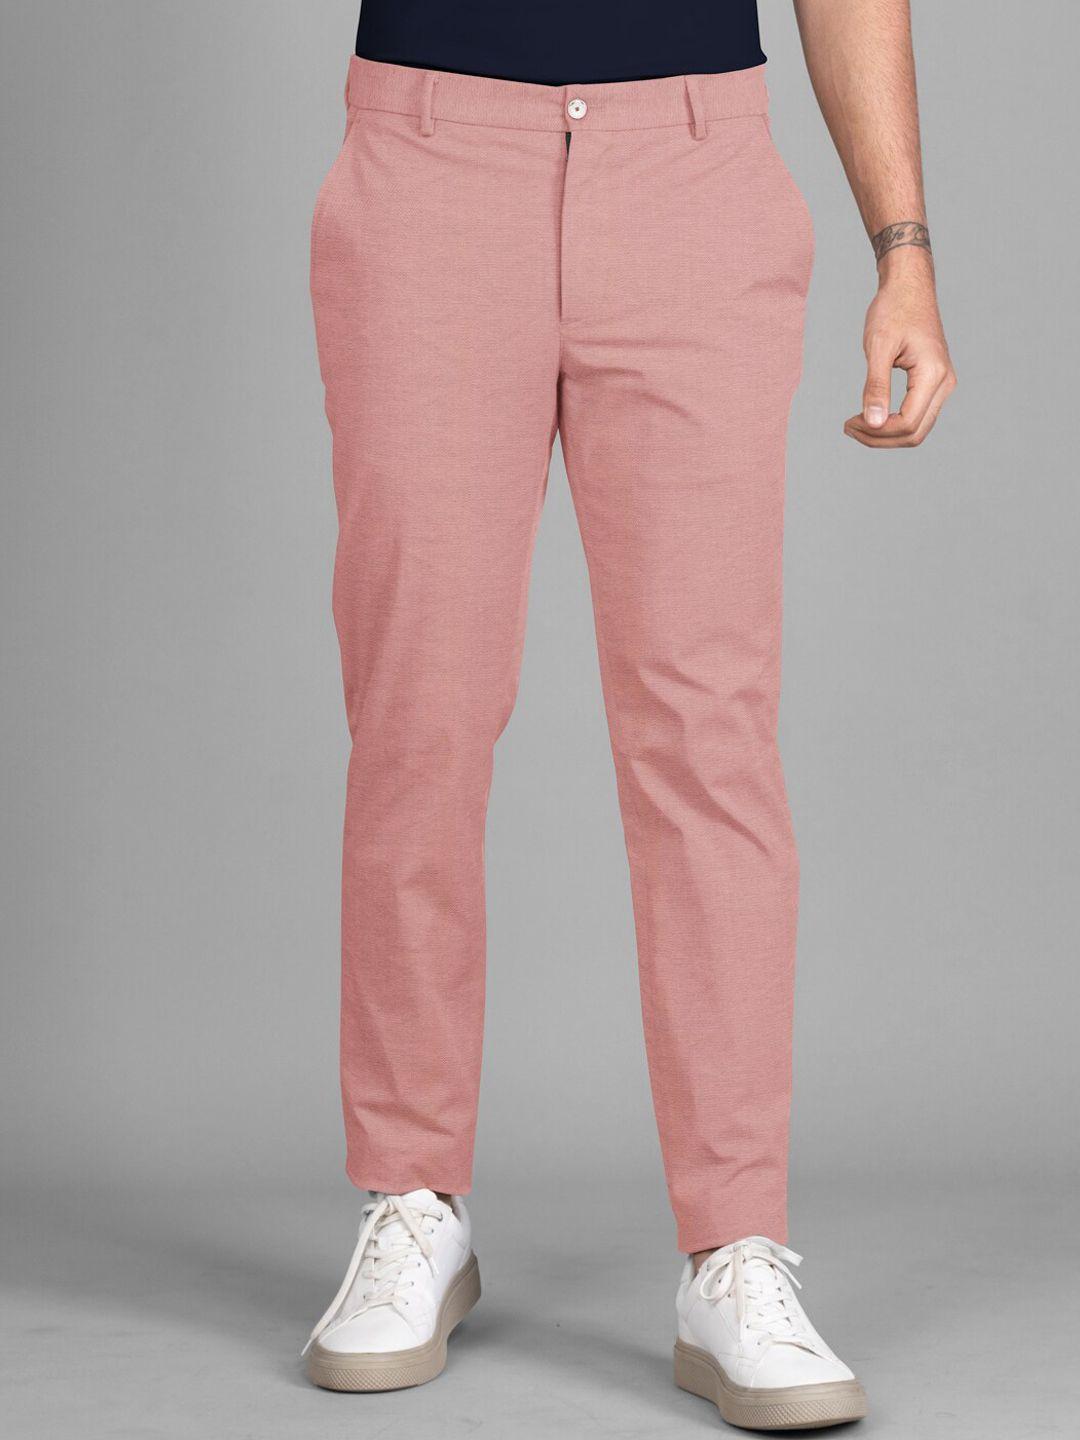 the pant project men cotton tailored slim fit chinos trousers